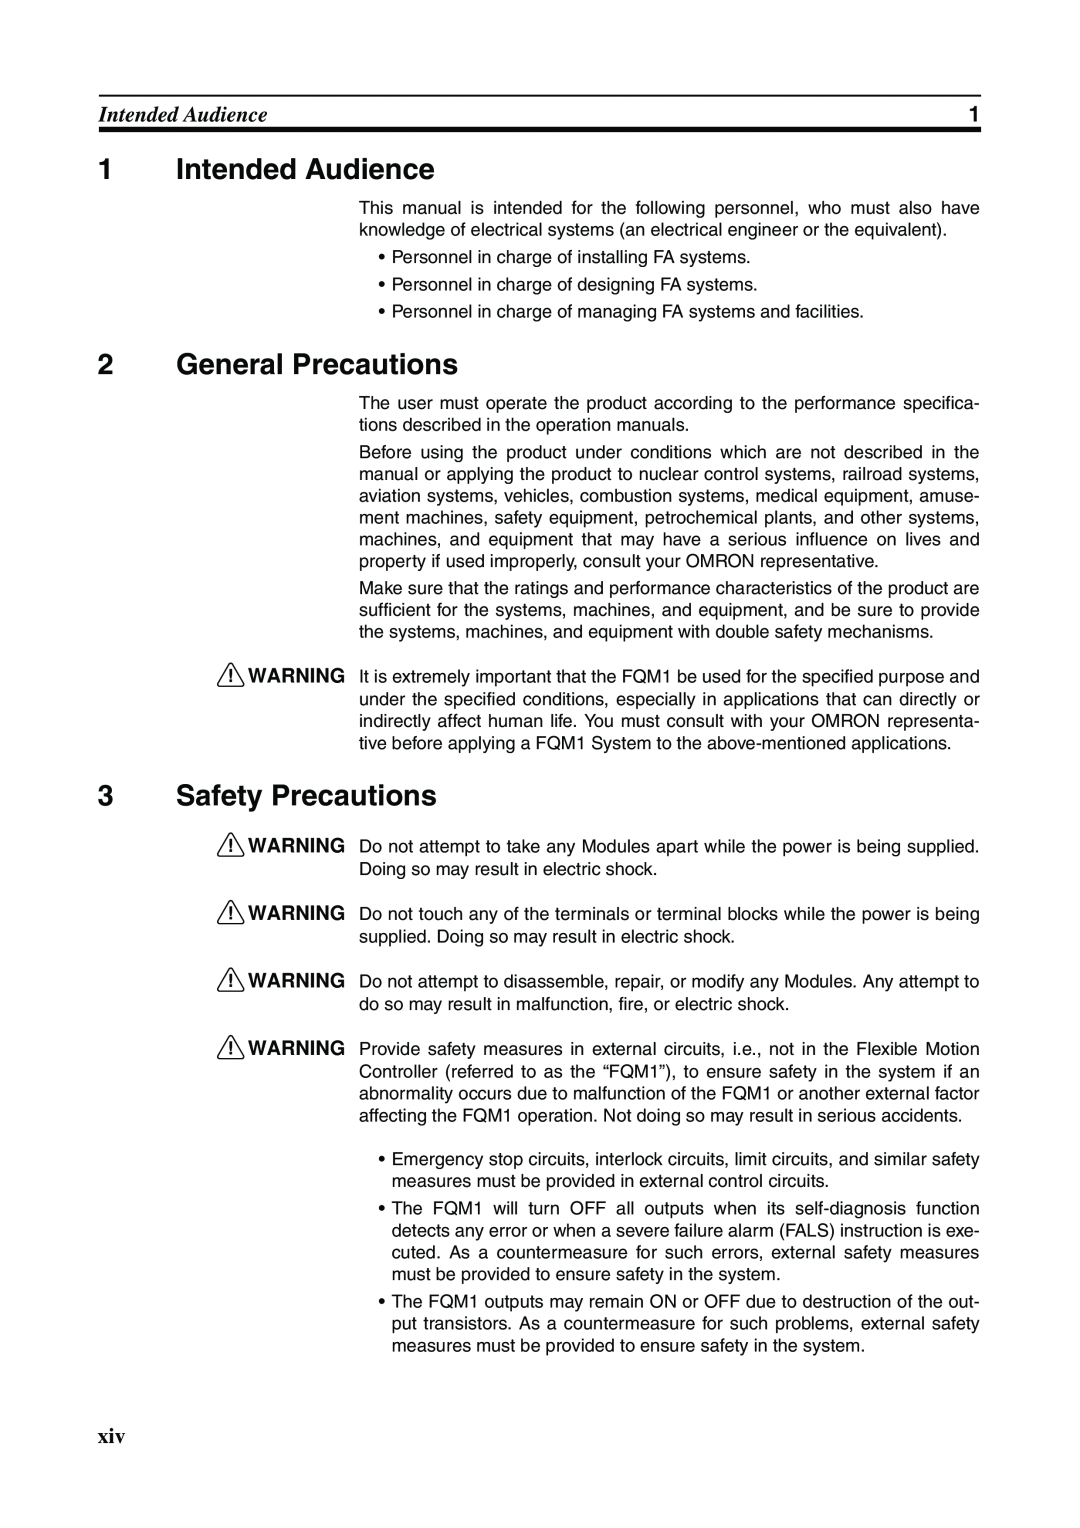 Omron FQM1-MMA21, FQM1-CM001, FQM1-MMP21 operation manual Intended Audience, General Precautions, Safety Precautions 